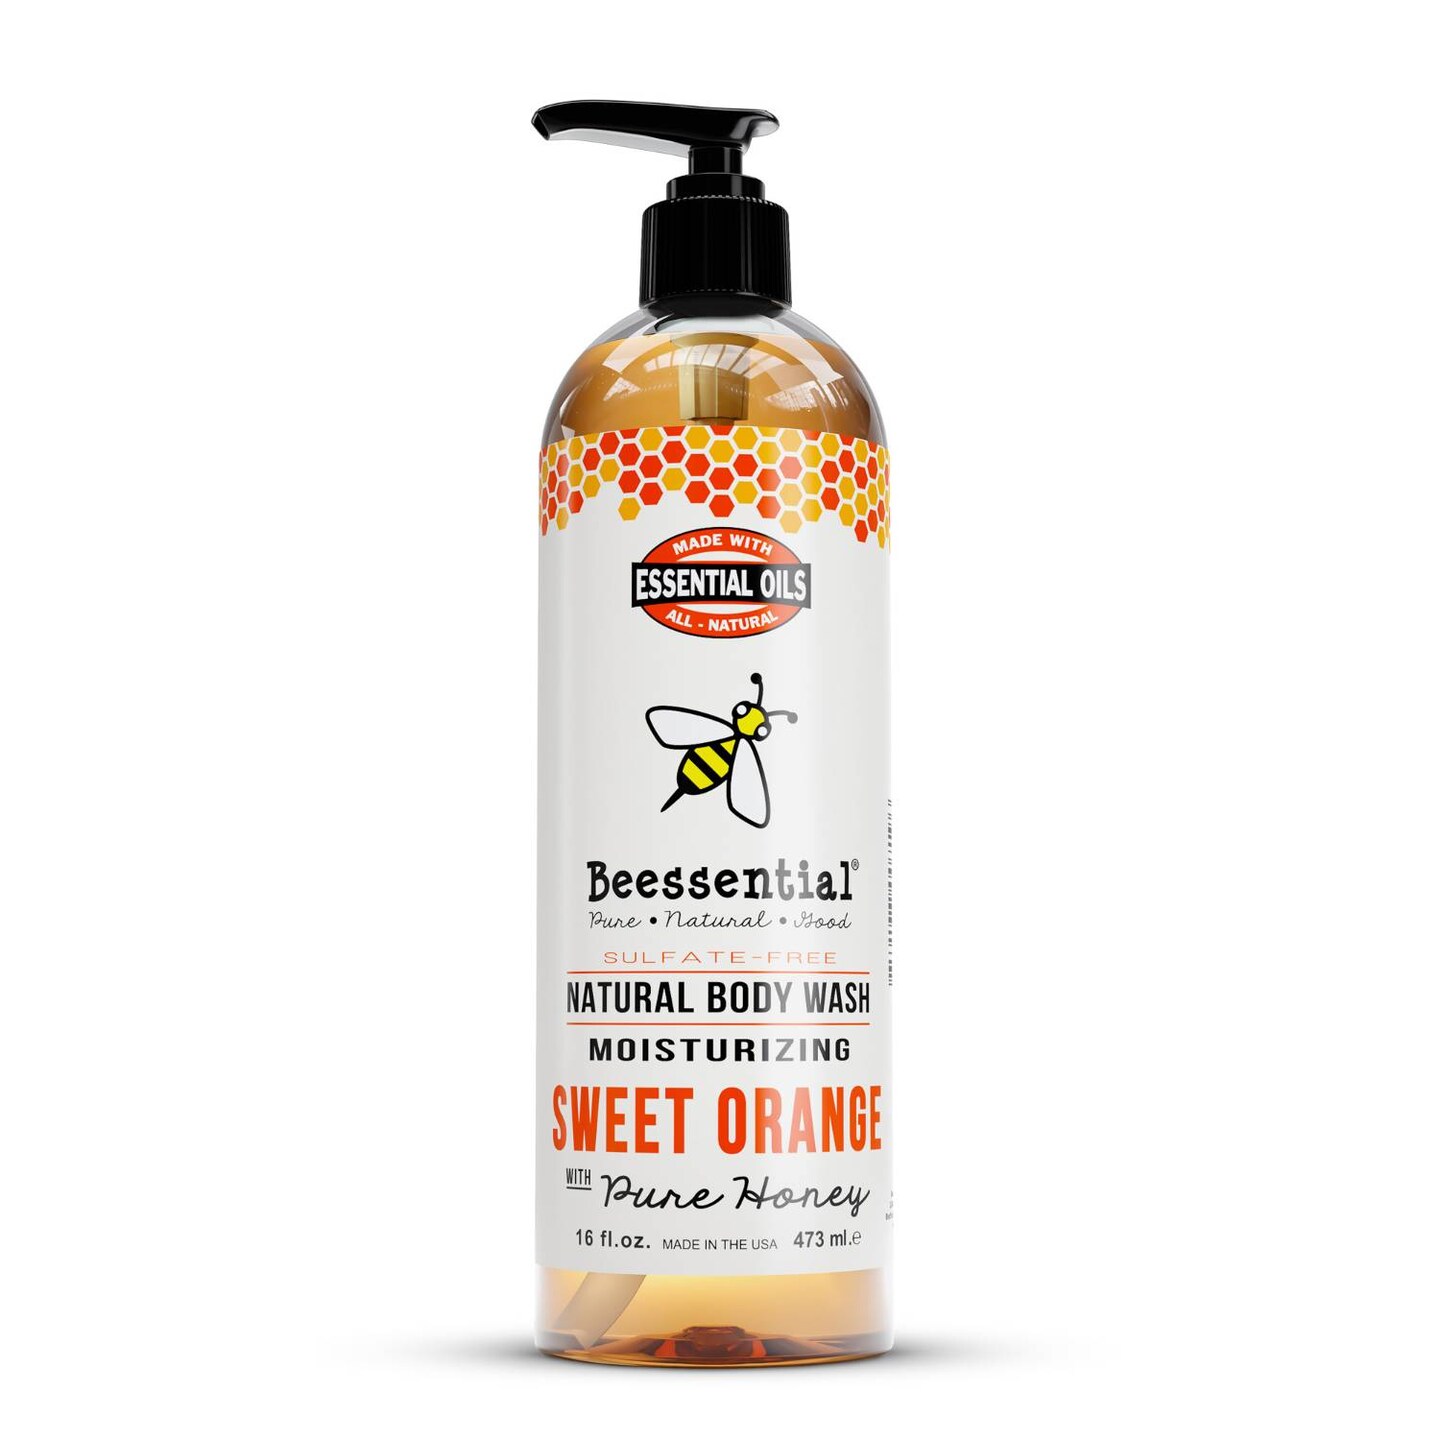 Beessential Natural Body Wash, Sweet Orange, Sulfate-Free Bath and Shower Gel with Essential Oils for Men &#x26; Women, 16 oz